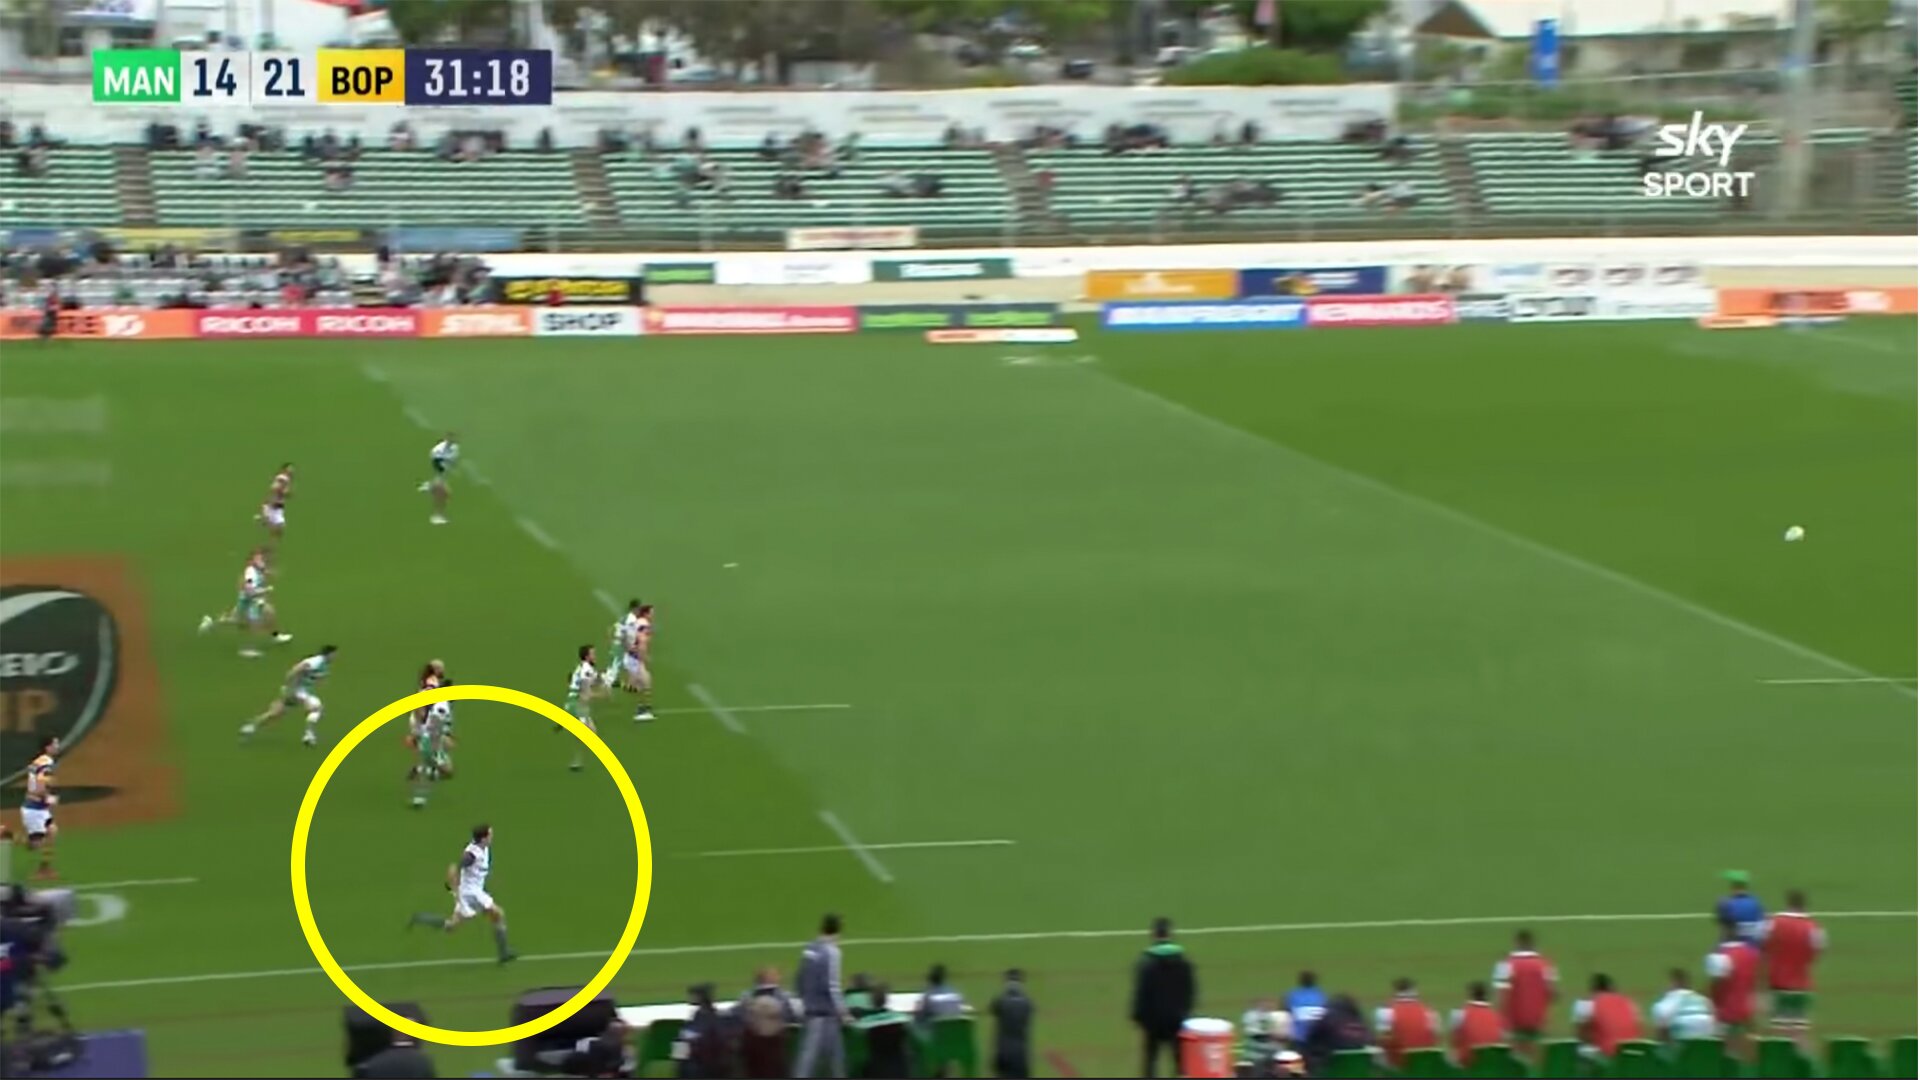 Fans are stunned at the incredible speed of a linesman in a rugby